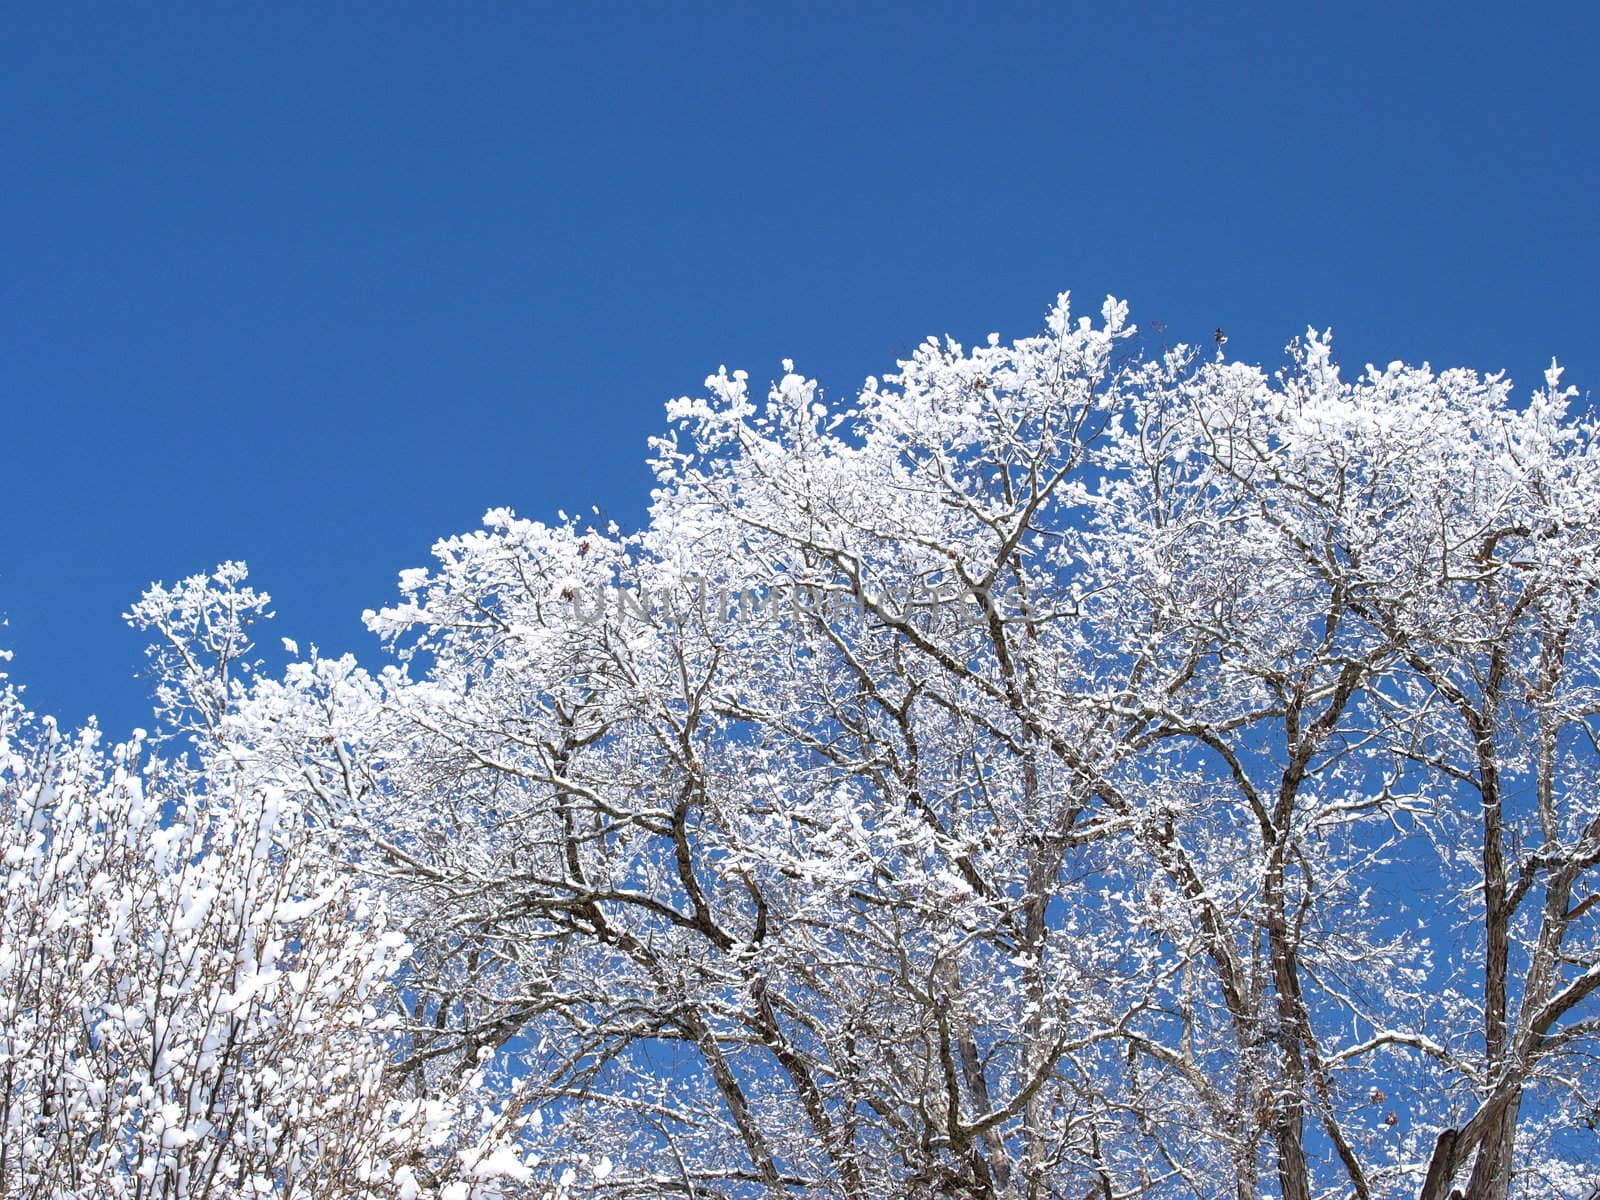 A snow covered tree after a winter storm